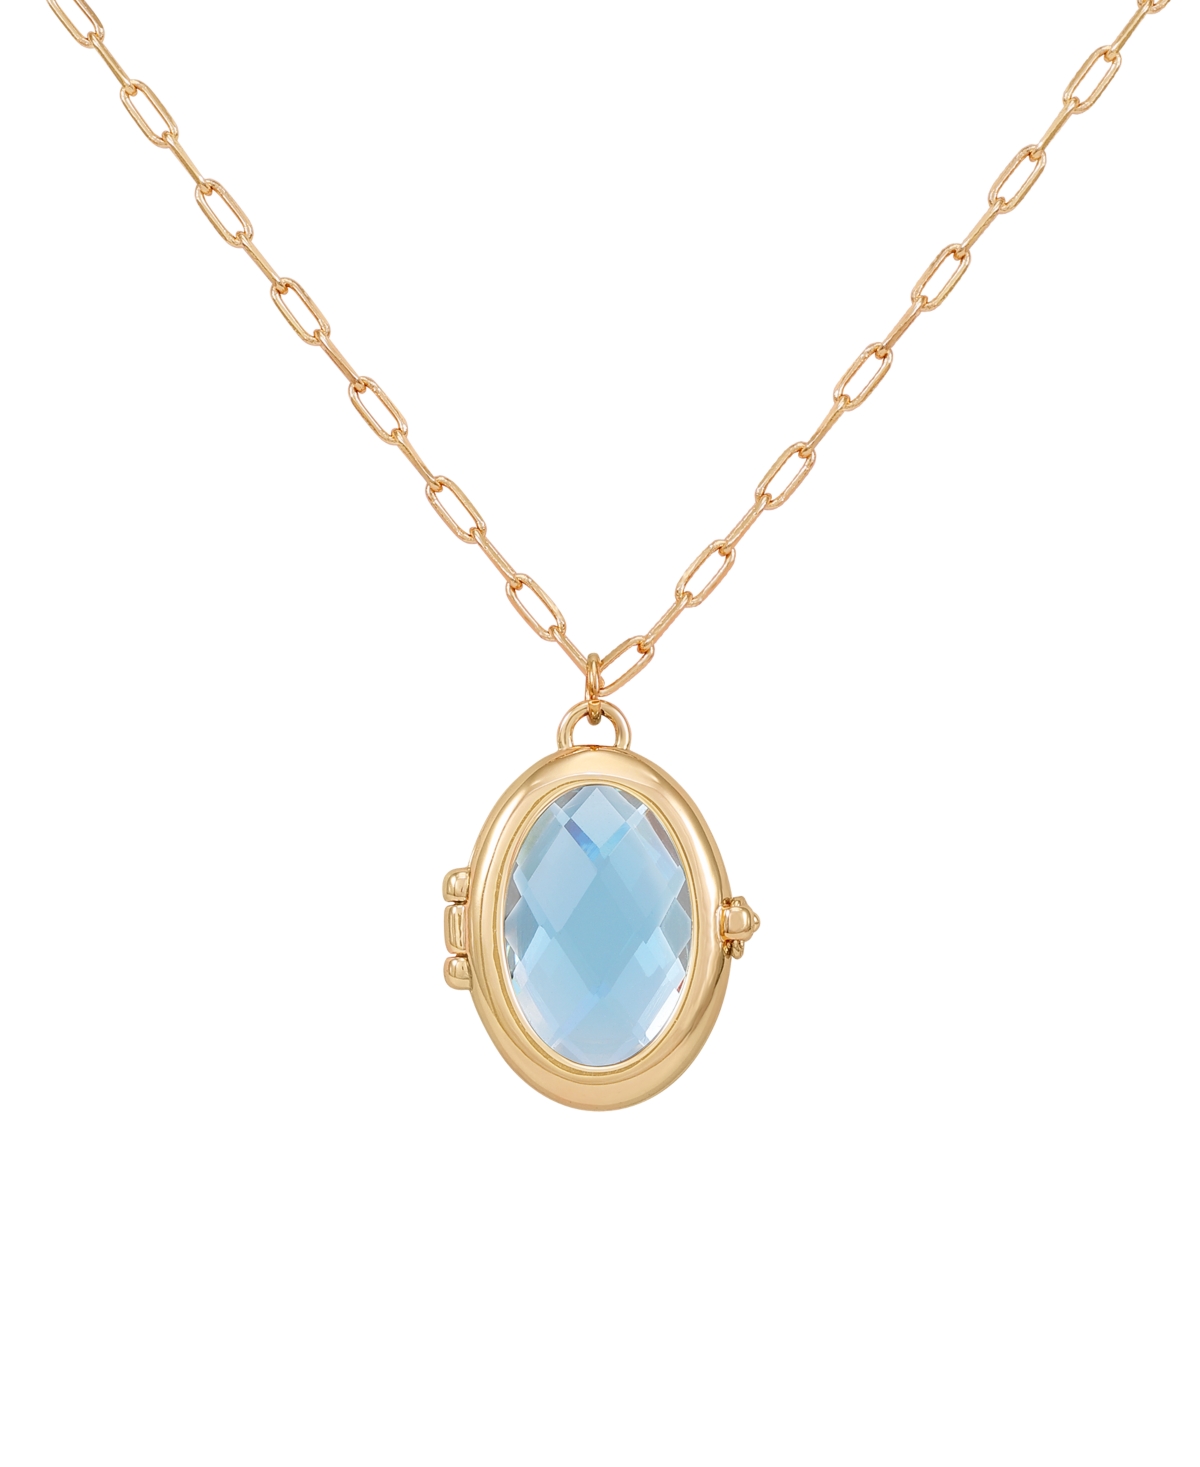 Guess Gold-tone Removable Stone Oval Locket Pendant Necklace, 18" + 3" Extender In Aqua